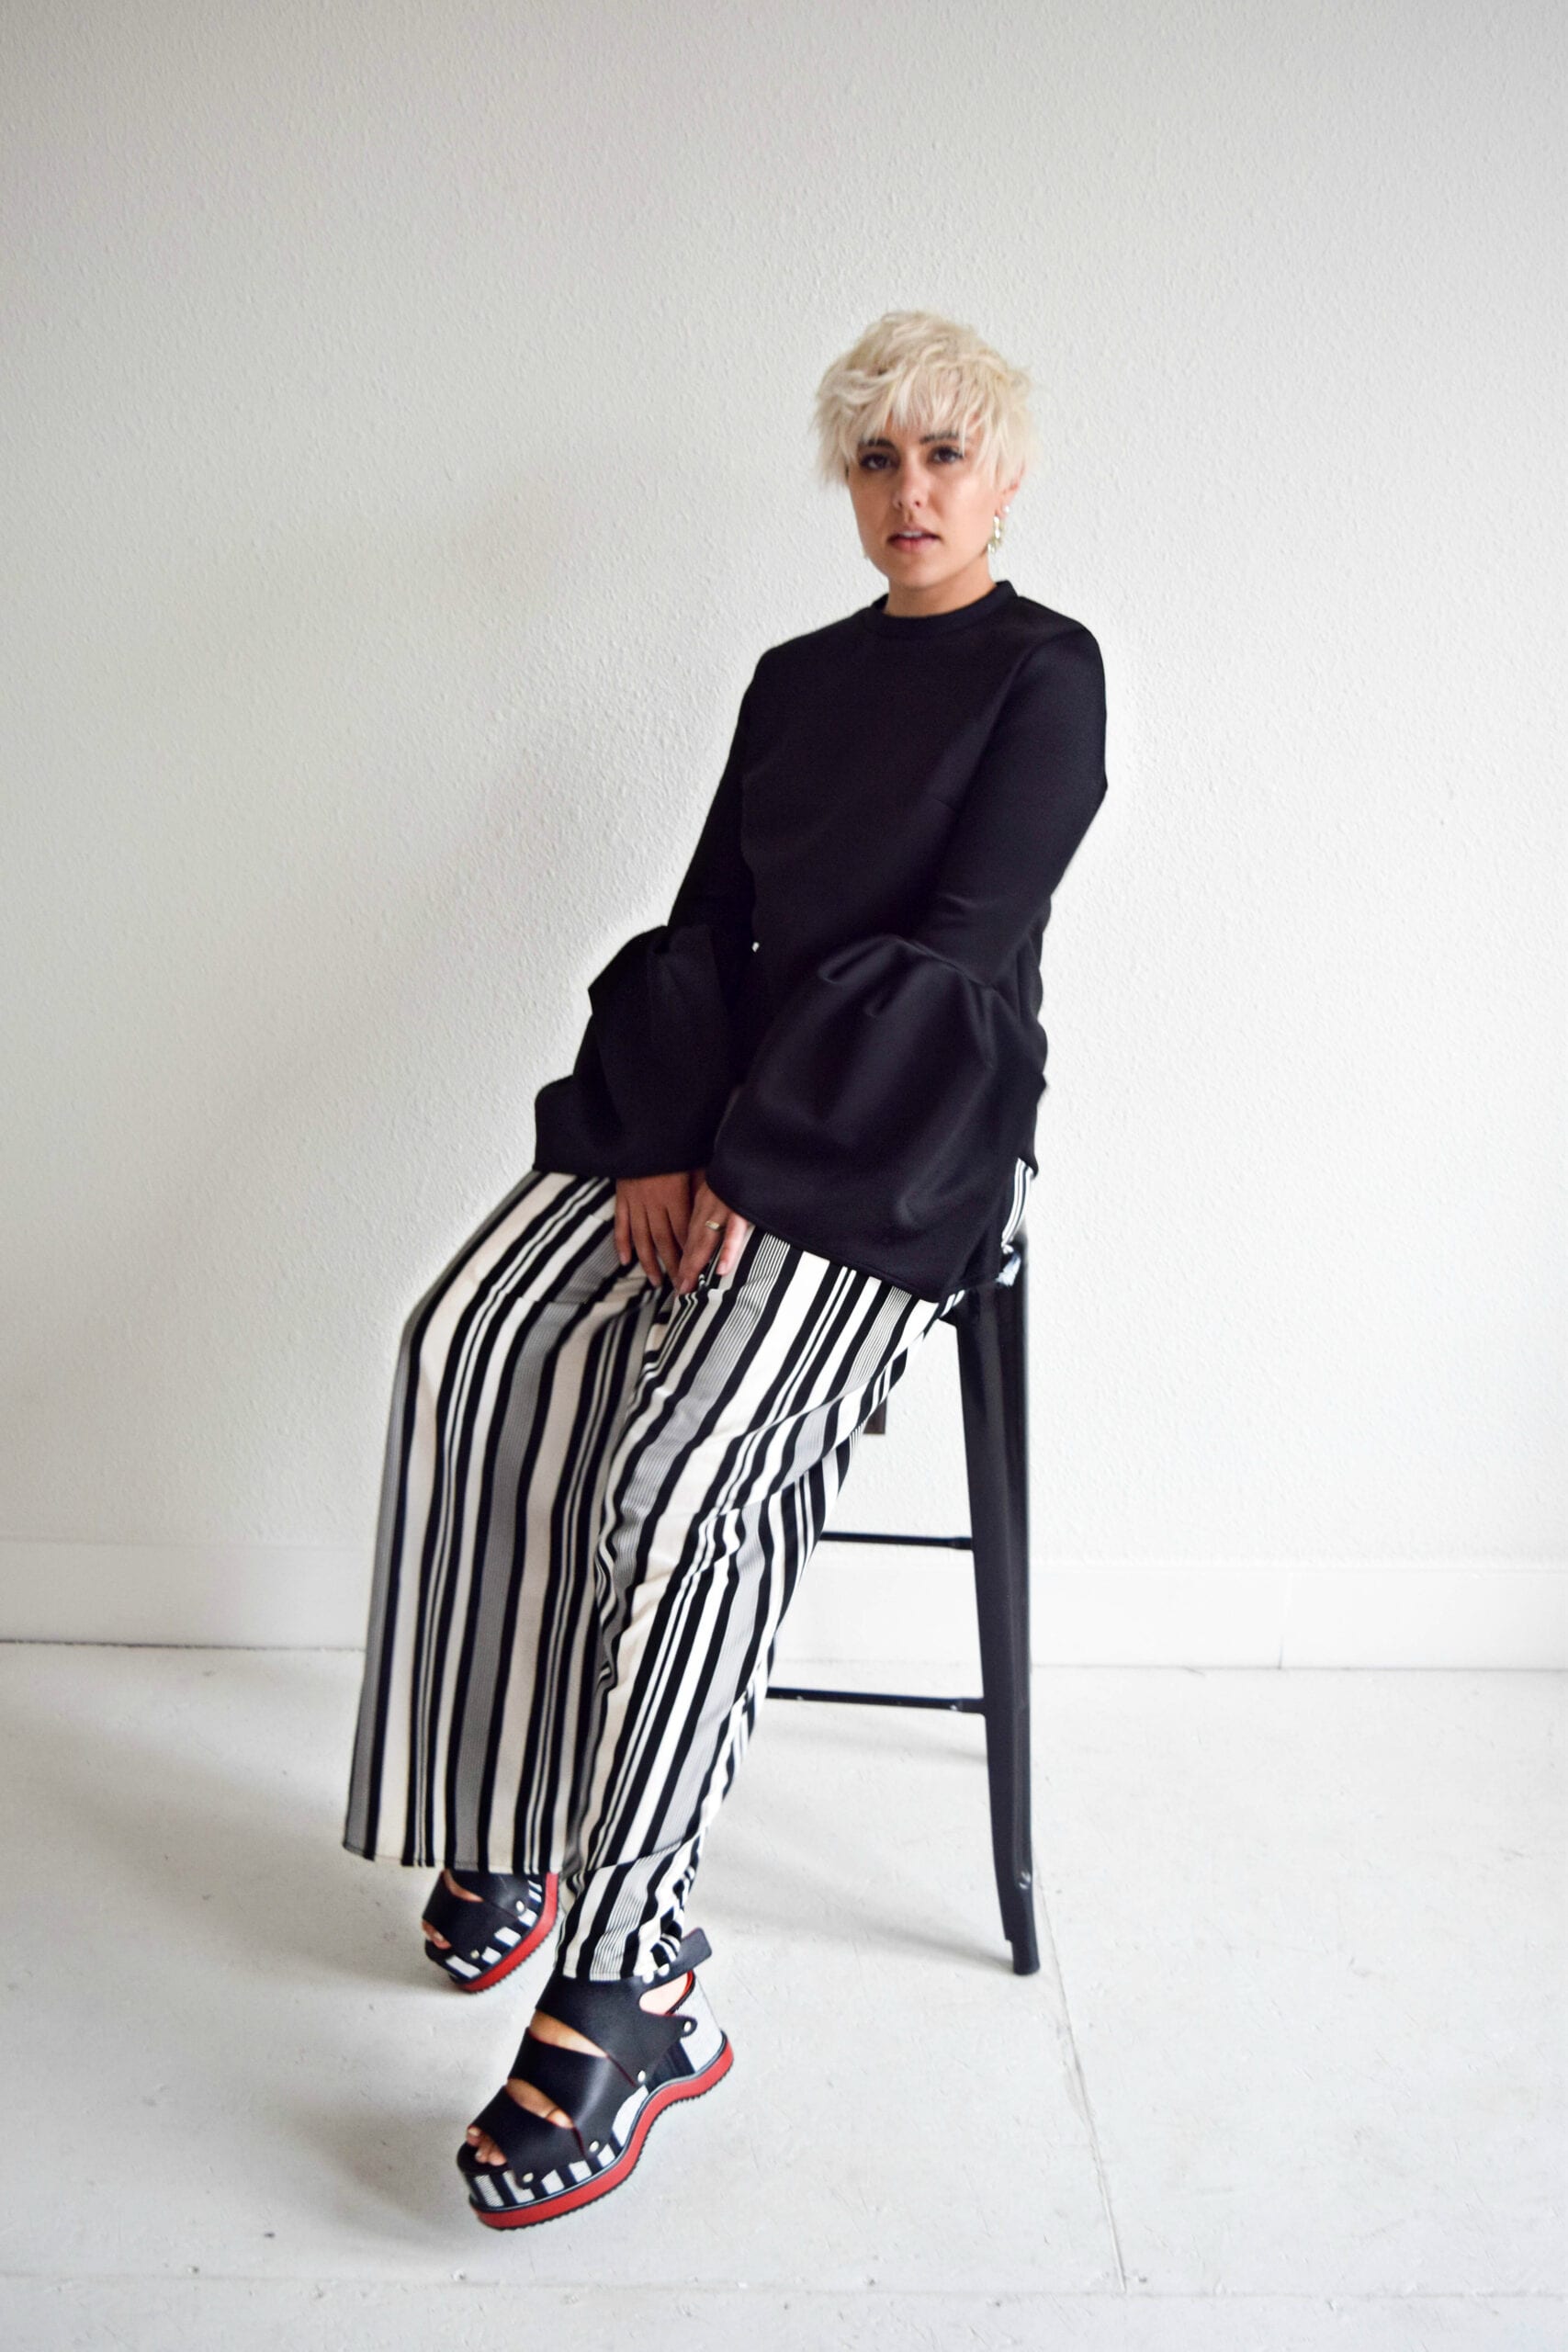 Wide Striped Pants as Worn by Fashion Blogger Rebecca from Blogger Not Billionaire